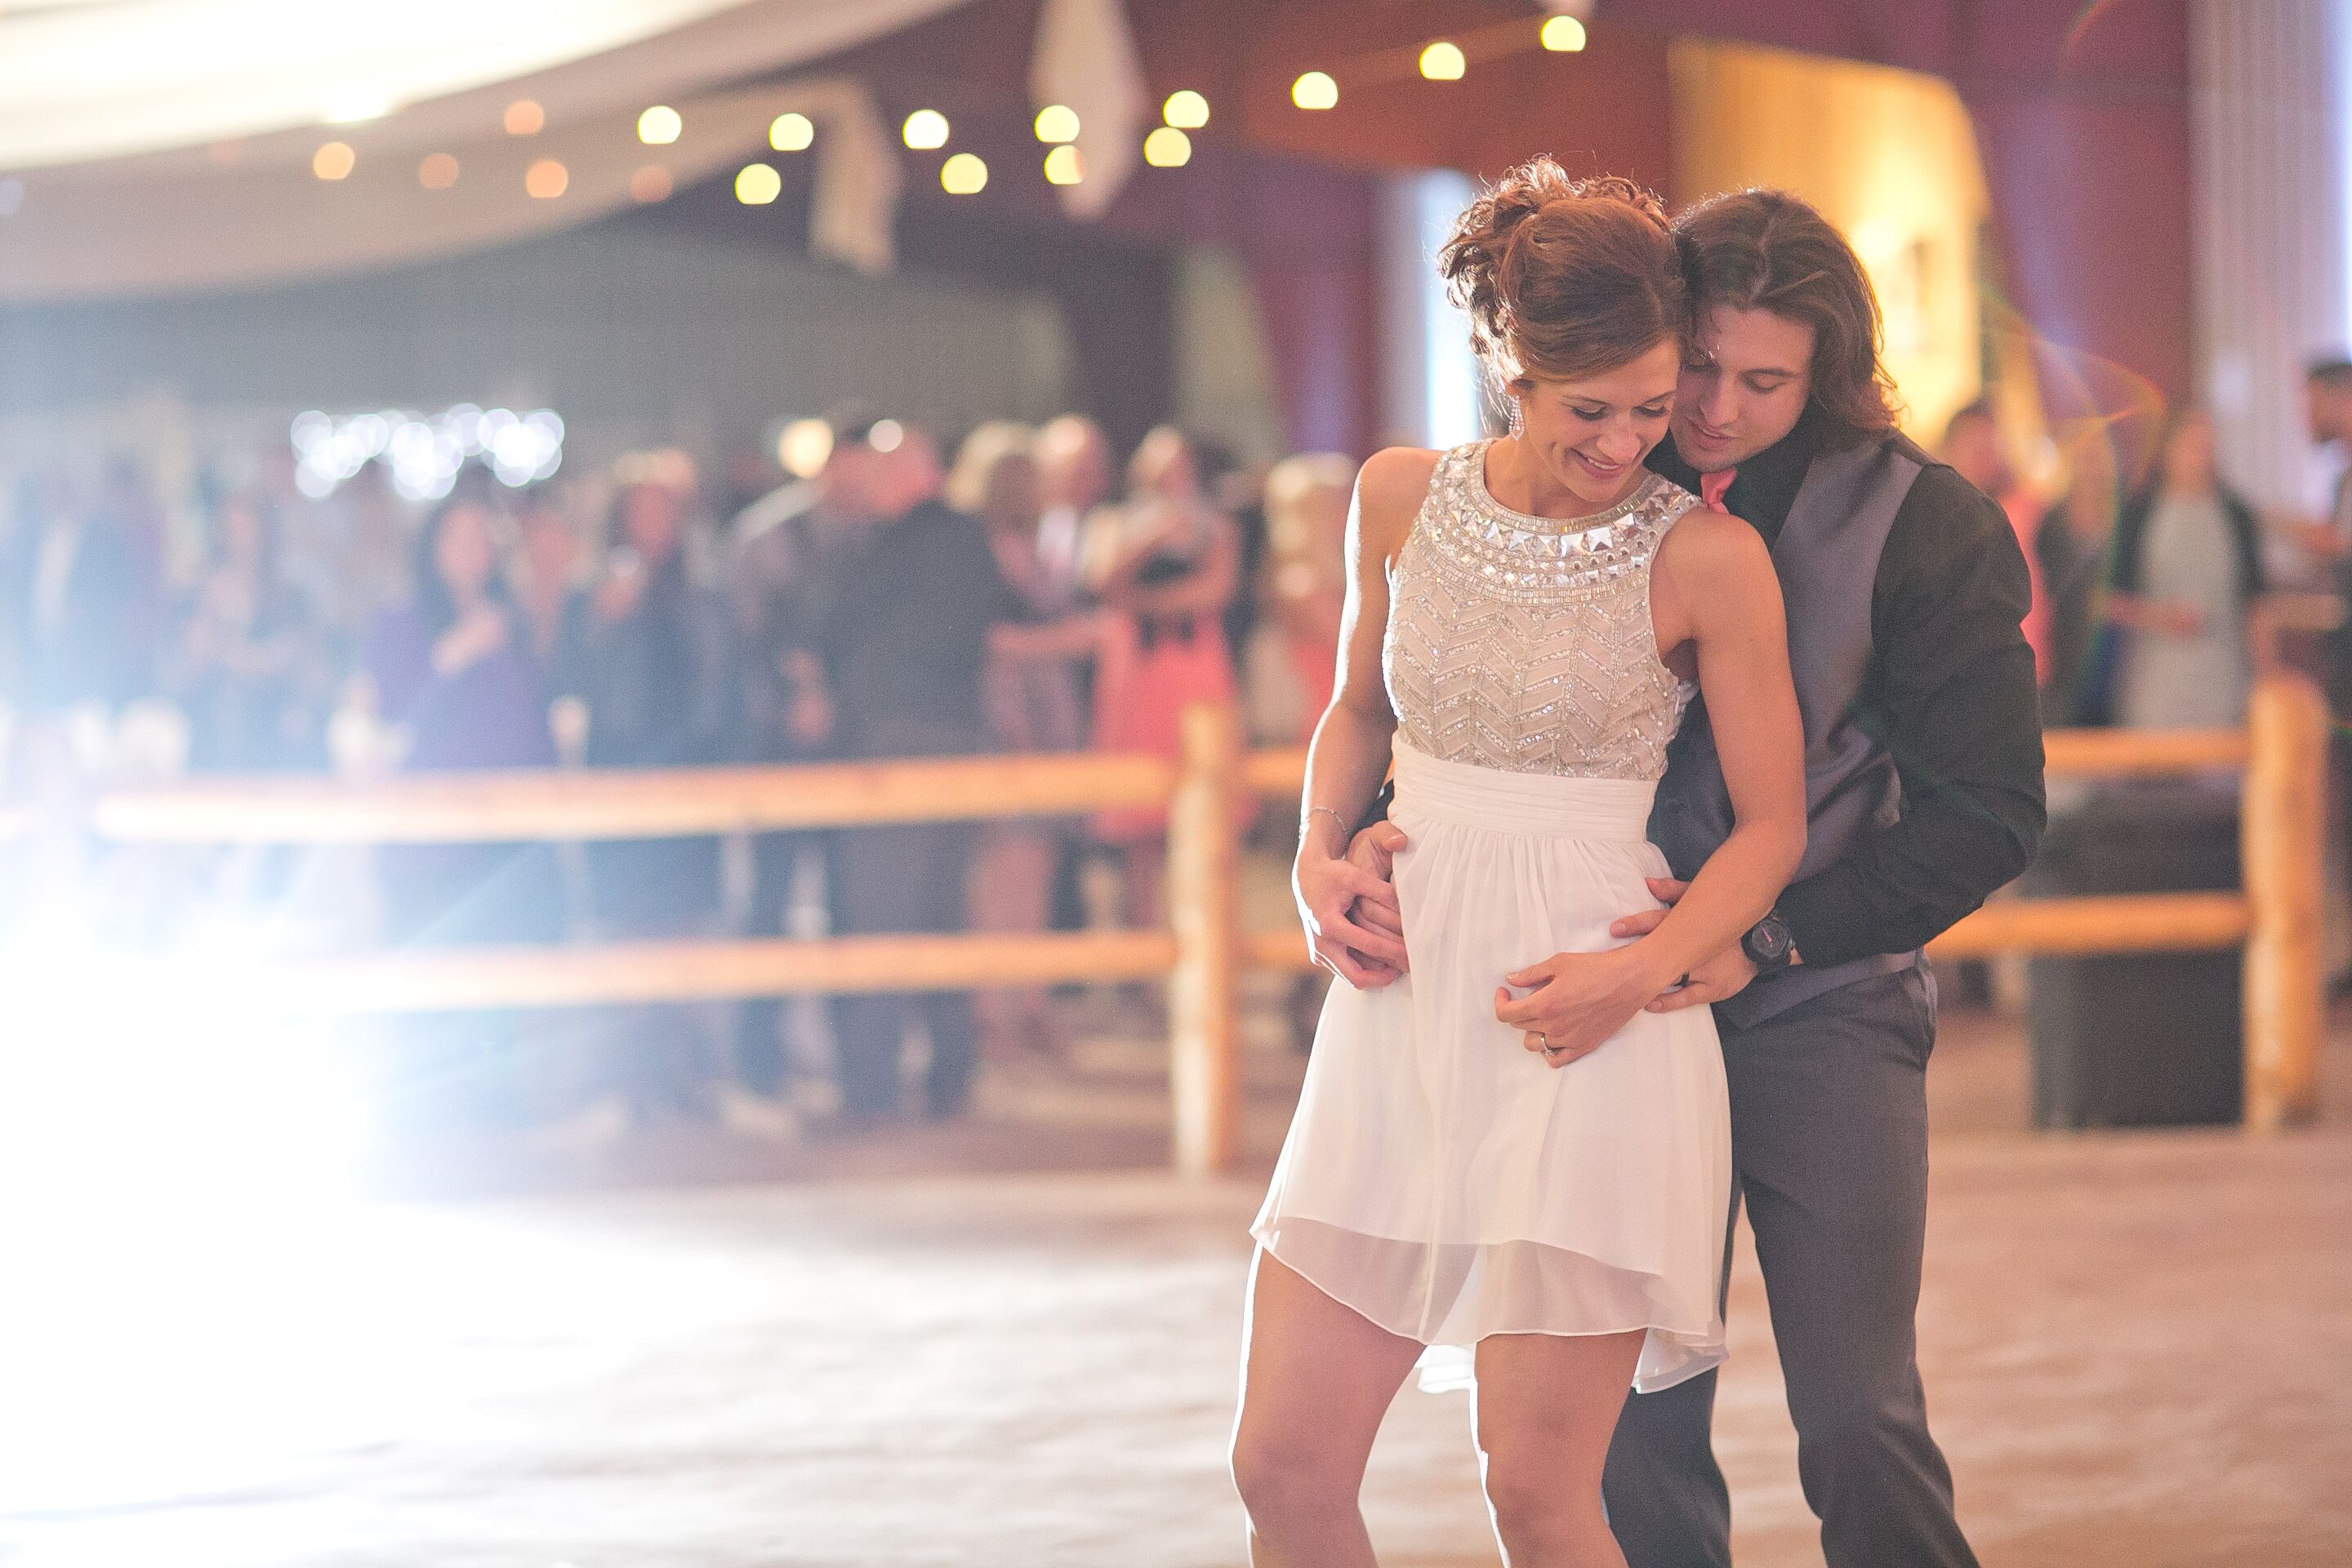 Country Swing Dance FirstDance Song